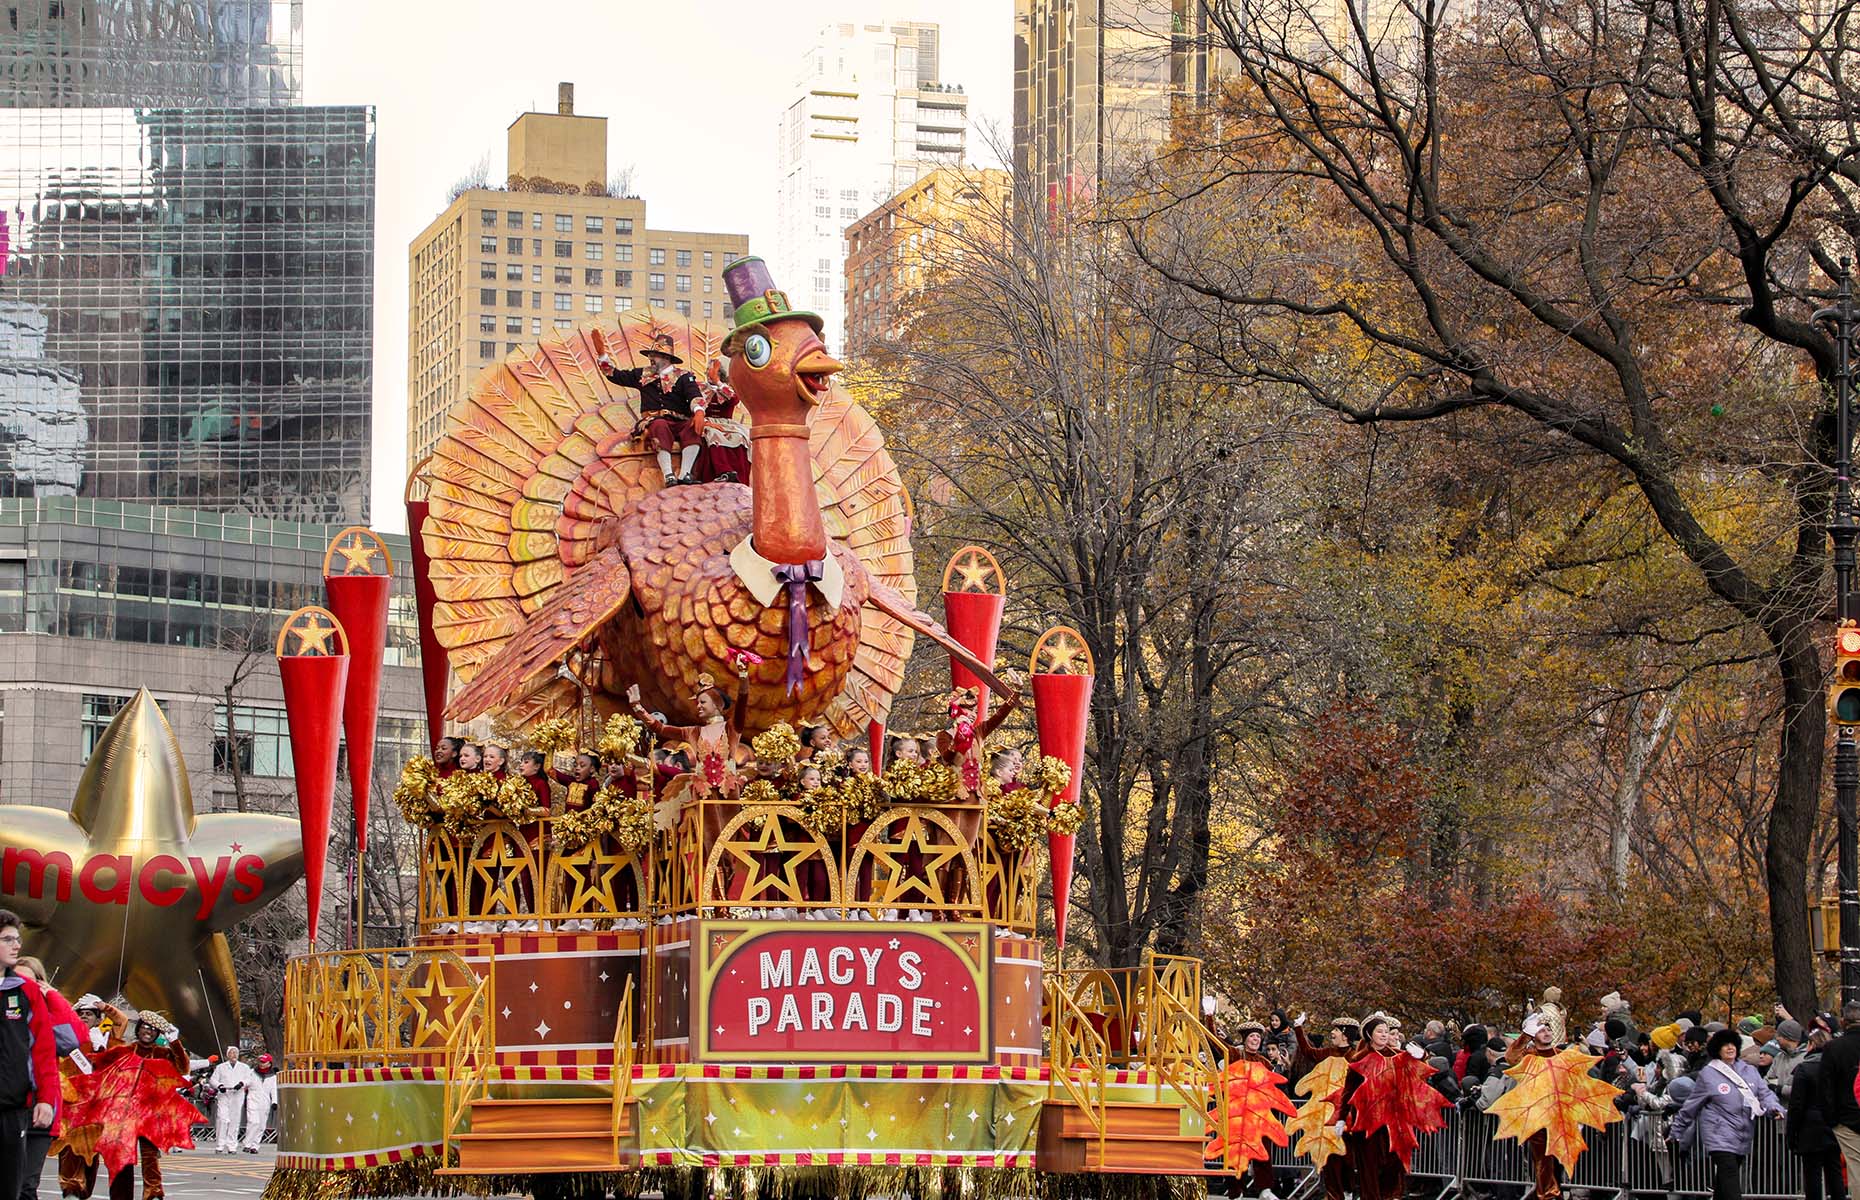 Macy's Day Parade (Image: TD Dolci/Shutterstock)